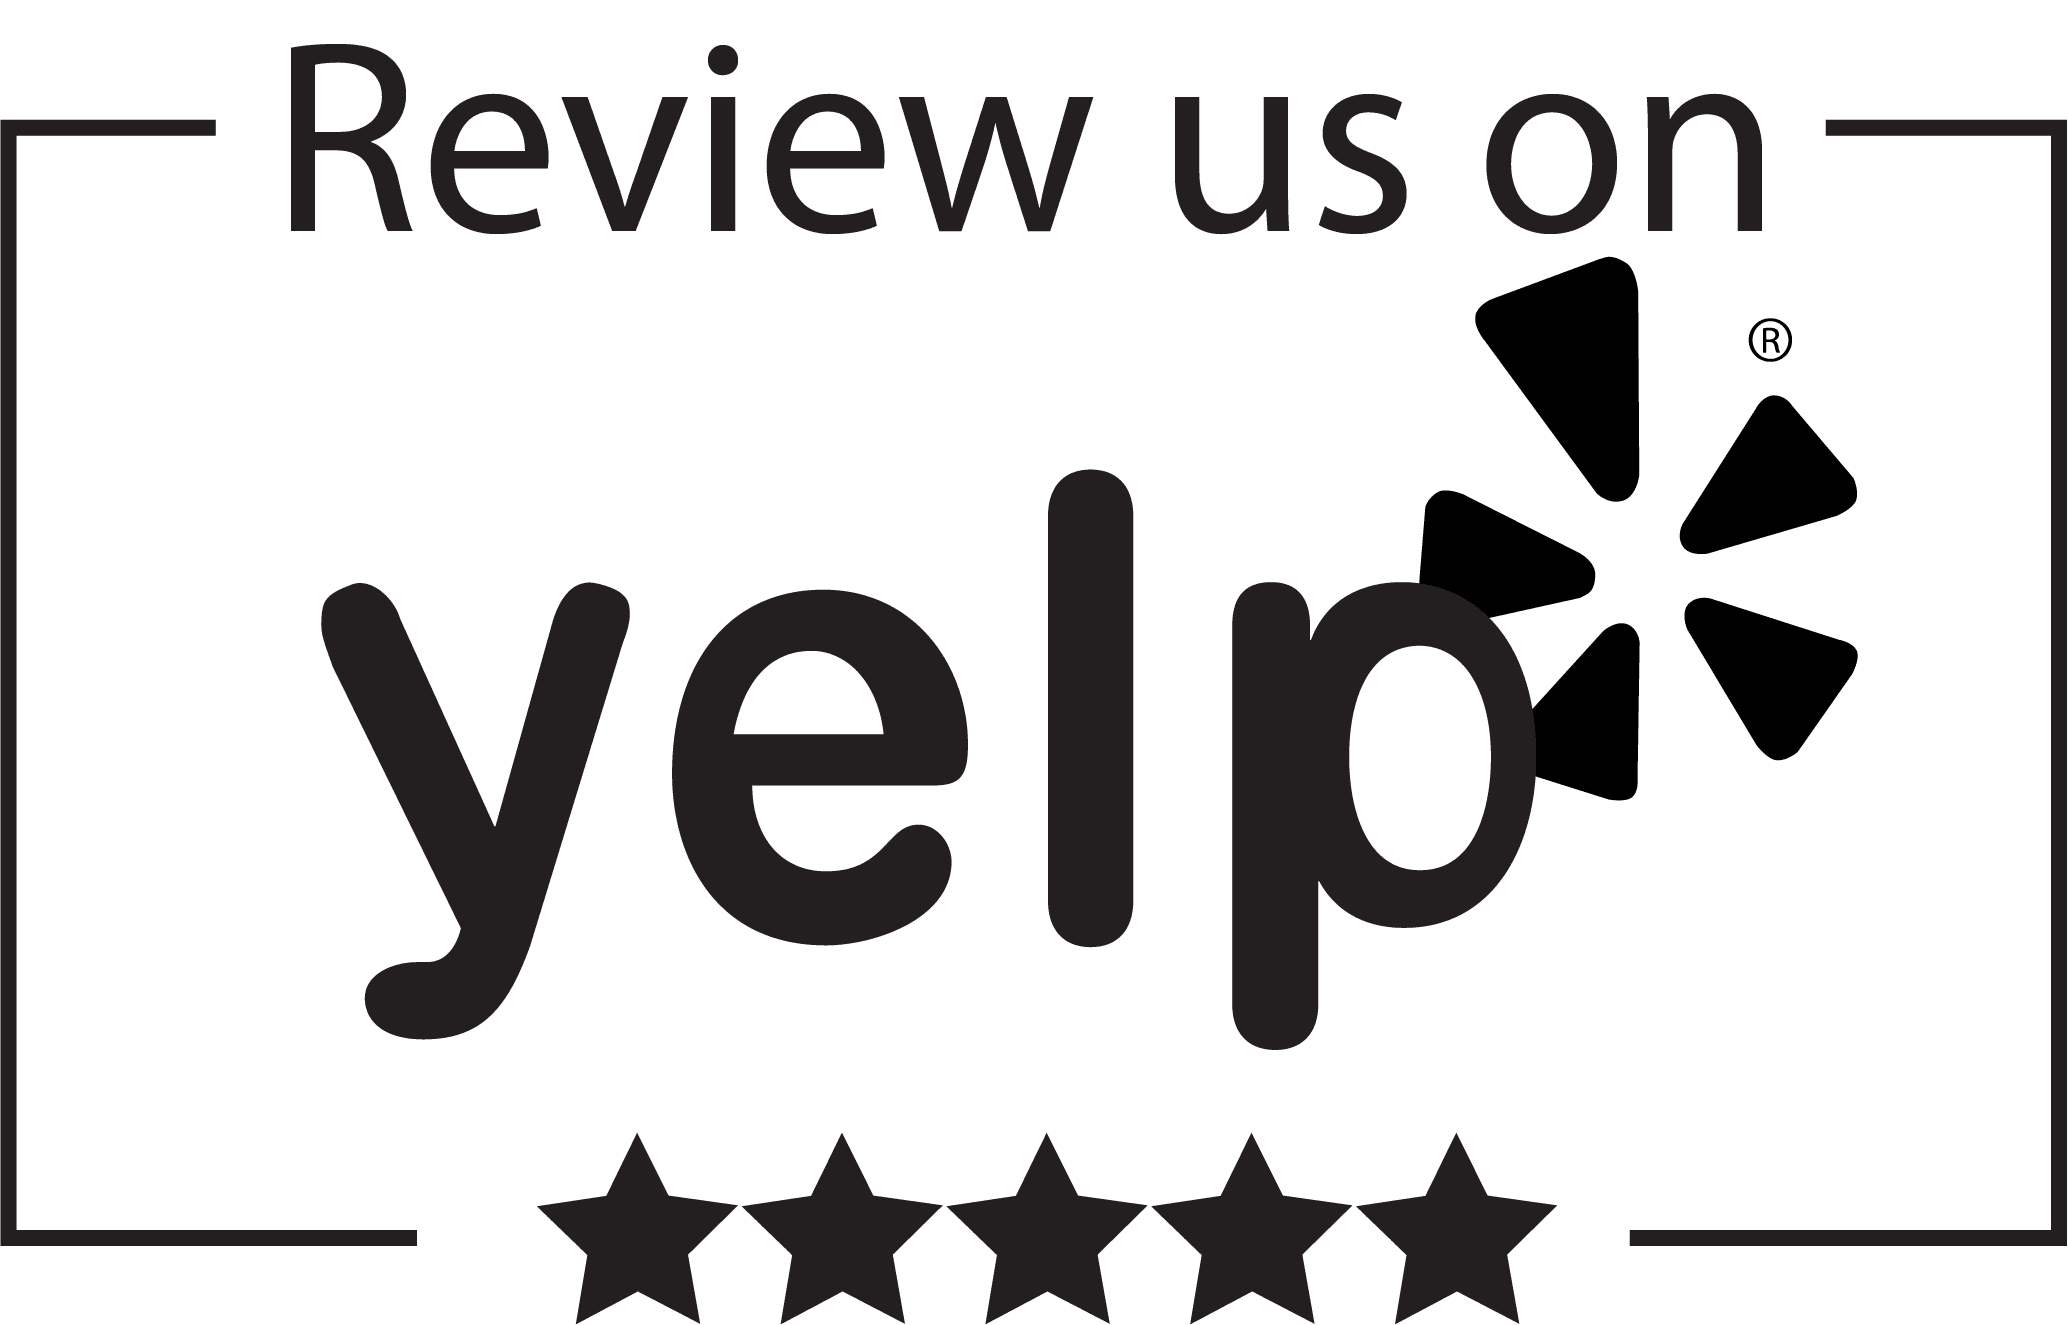 leave lafayette crawlspace remediation a yelp review